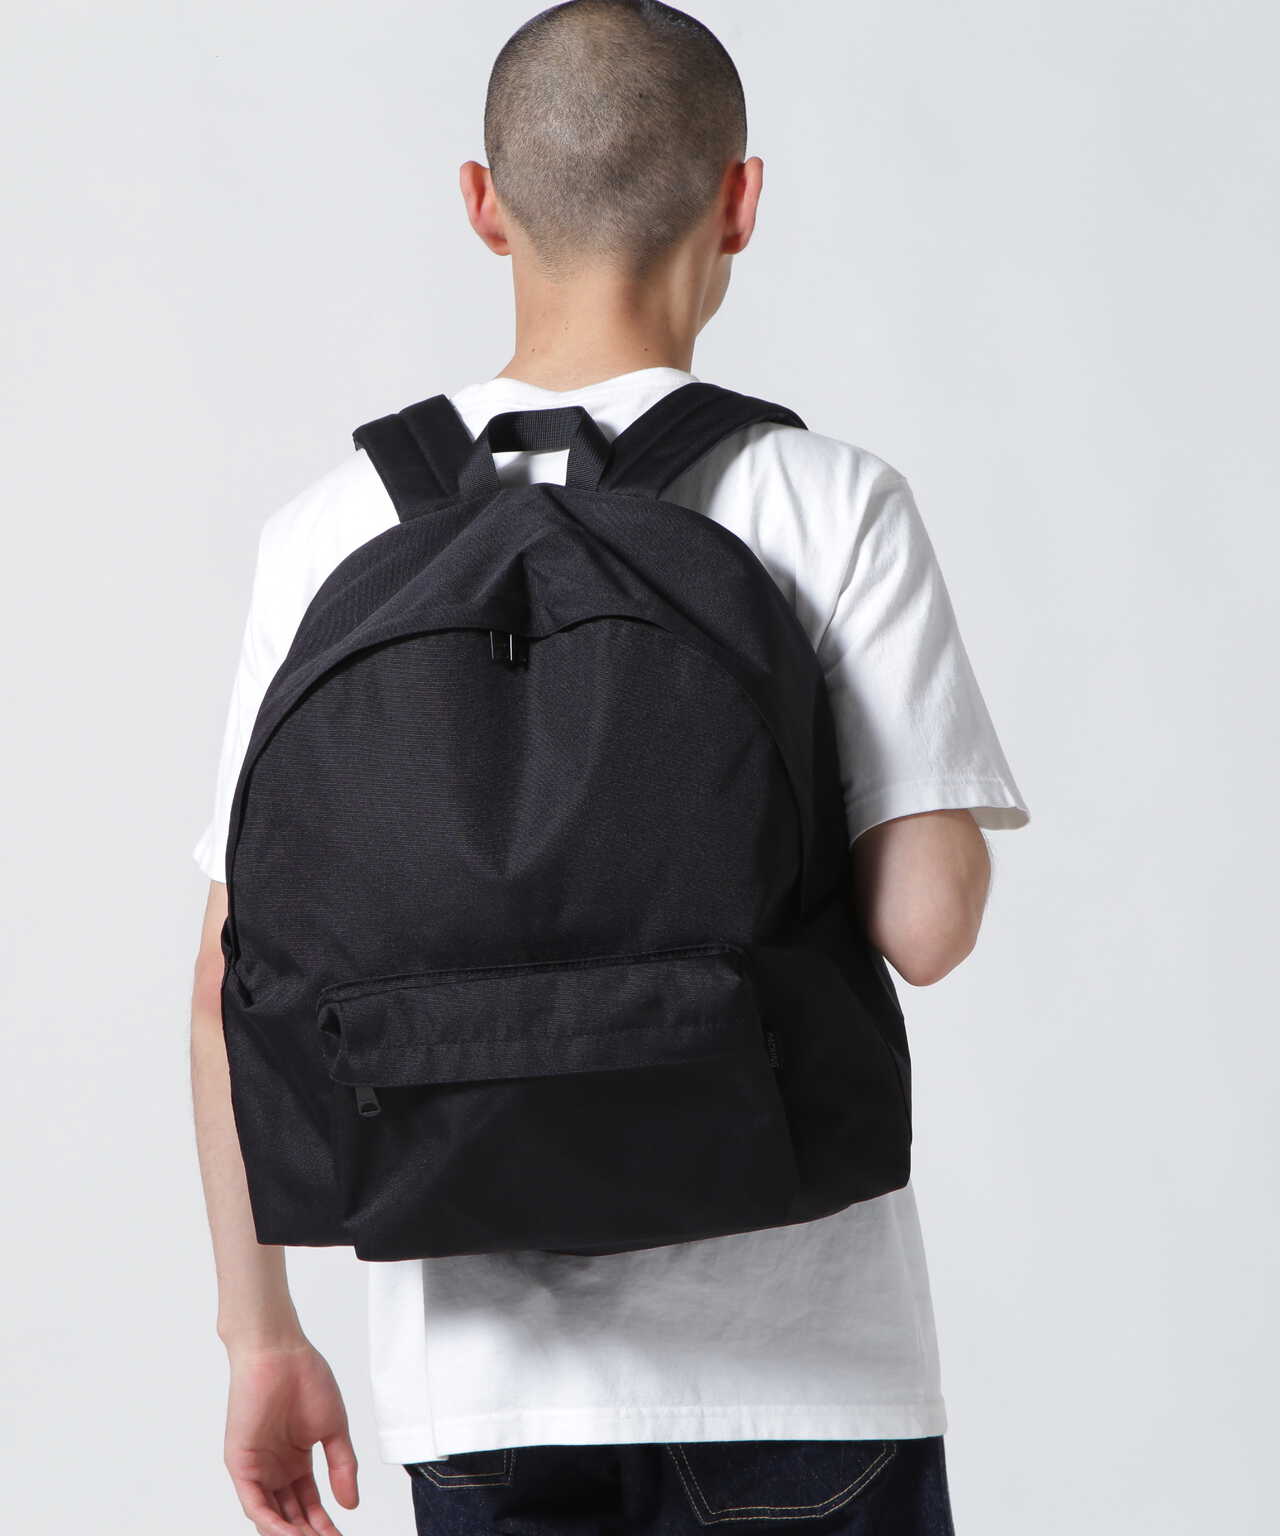 packing PC BACK PACK BLACK PA-030 バックパック